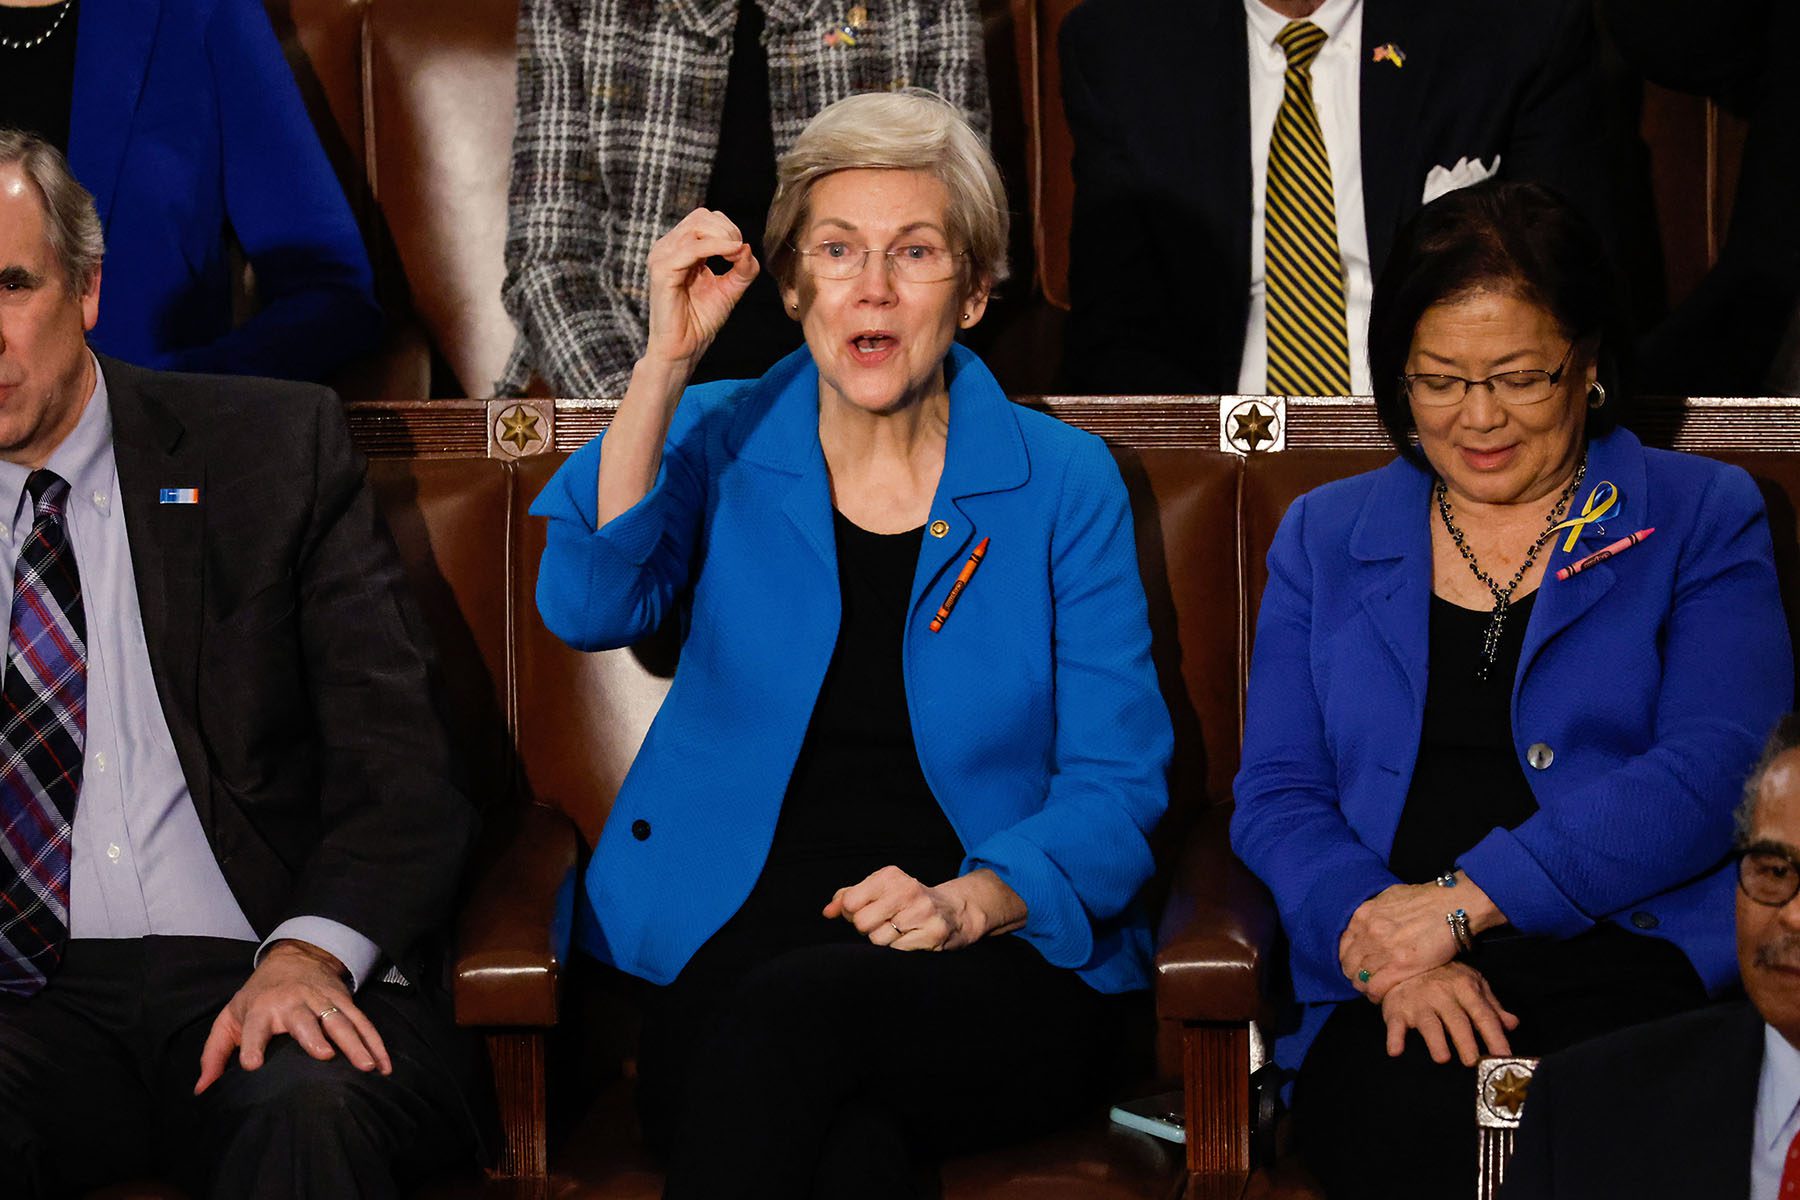 Sen. Elizabeth Warren wears a crayons pinned to her outfit to call attention the child care crisis as President Biden delivers his State of the Union address.